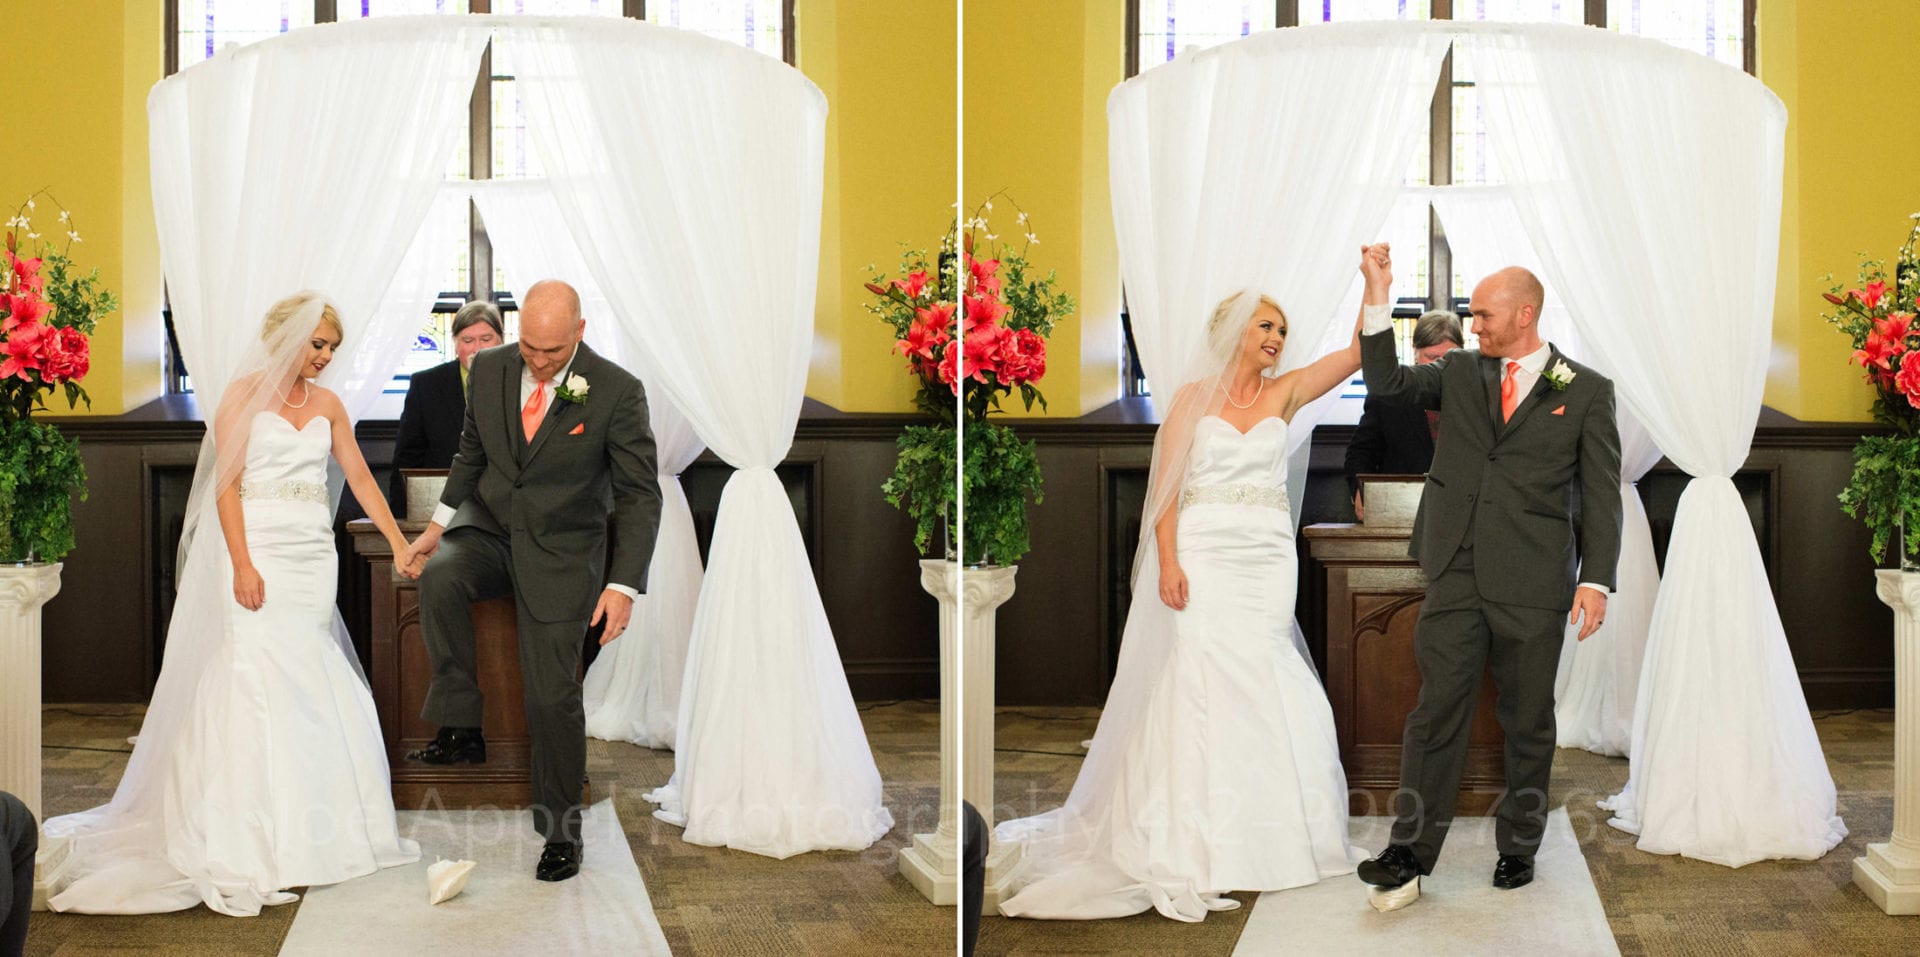 Two photos of a bride and groom holding hands while the groom stomps on a glass in the Jewish tradition at the end of their wedding ceremony at the Union Project in East Liberty. The walls are yellow and there is a white curtain behind them.